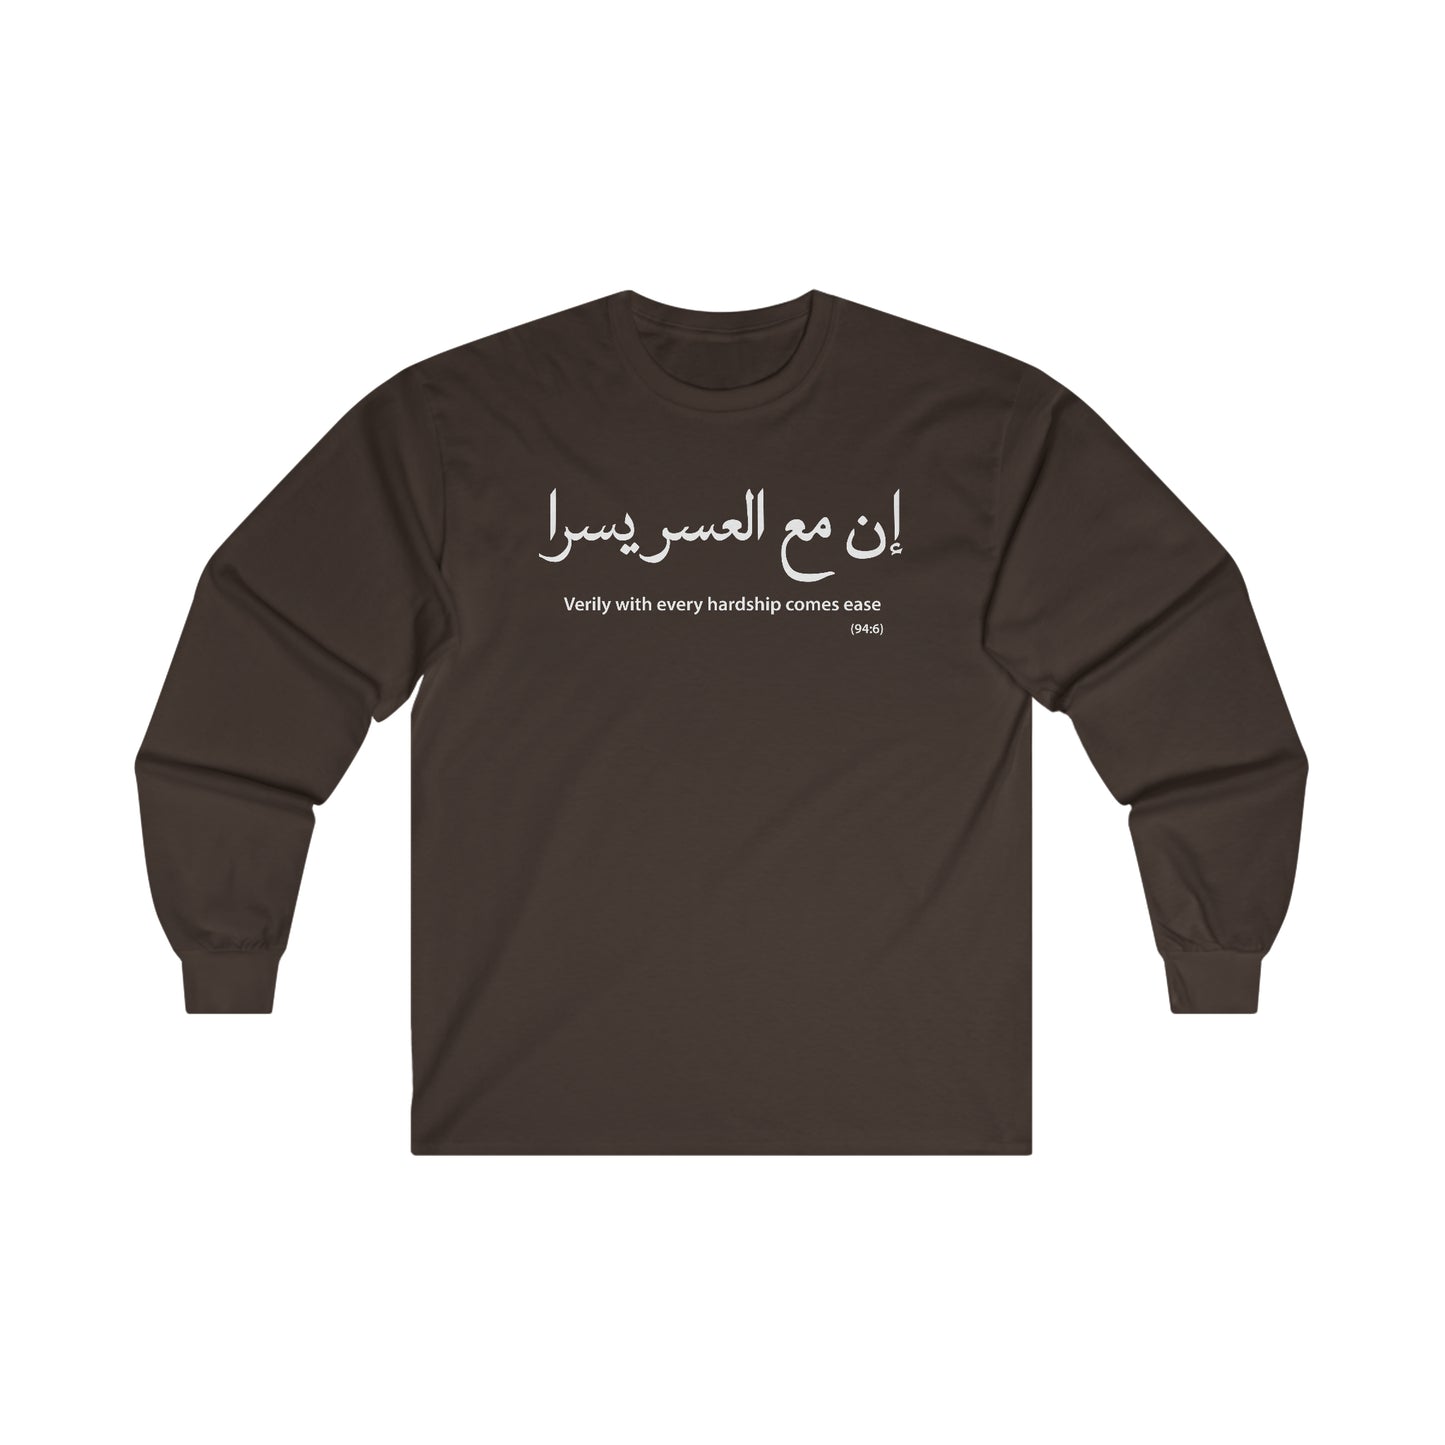 Quran Verse - (94:6) - Verily with every hardship comes ease Ultra Cotton Long Sleeve Tee